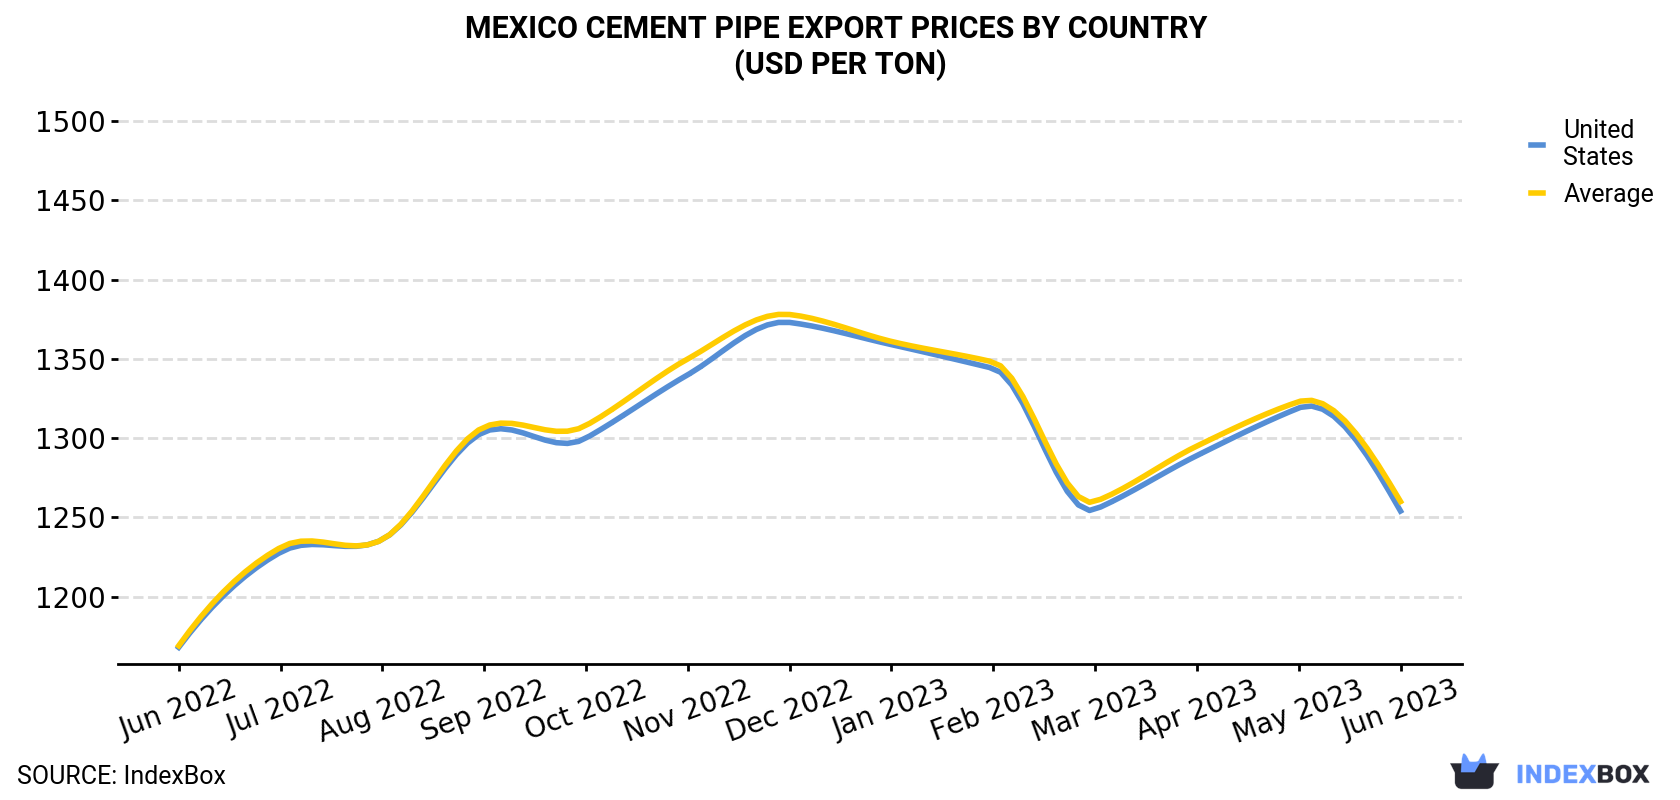 Mexico Cement Pipe Export Prices By Country (USD Per Ton)